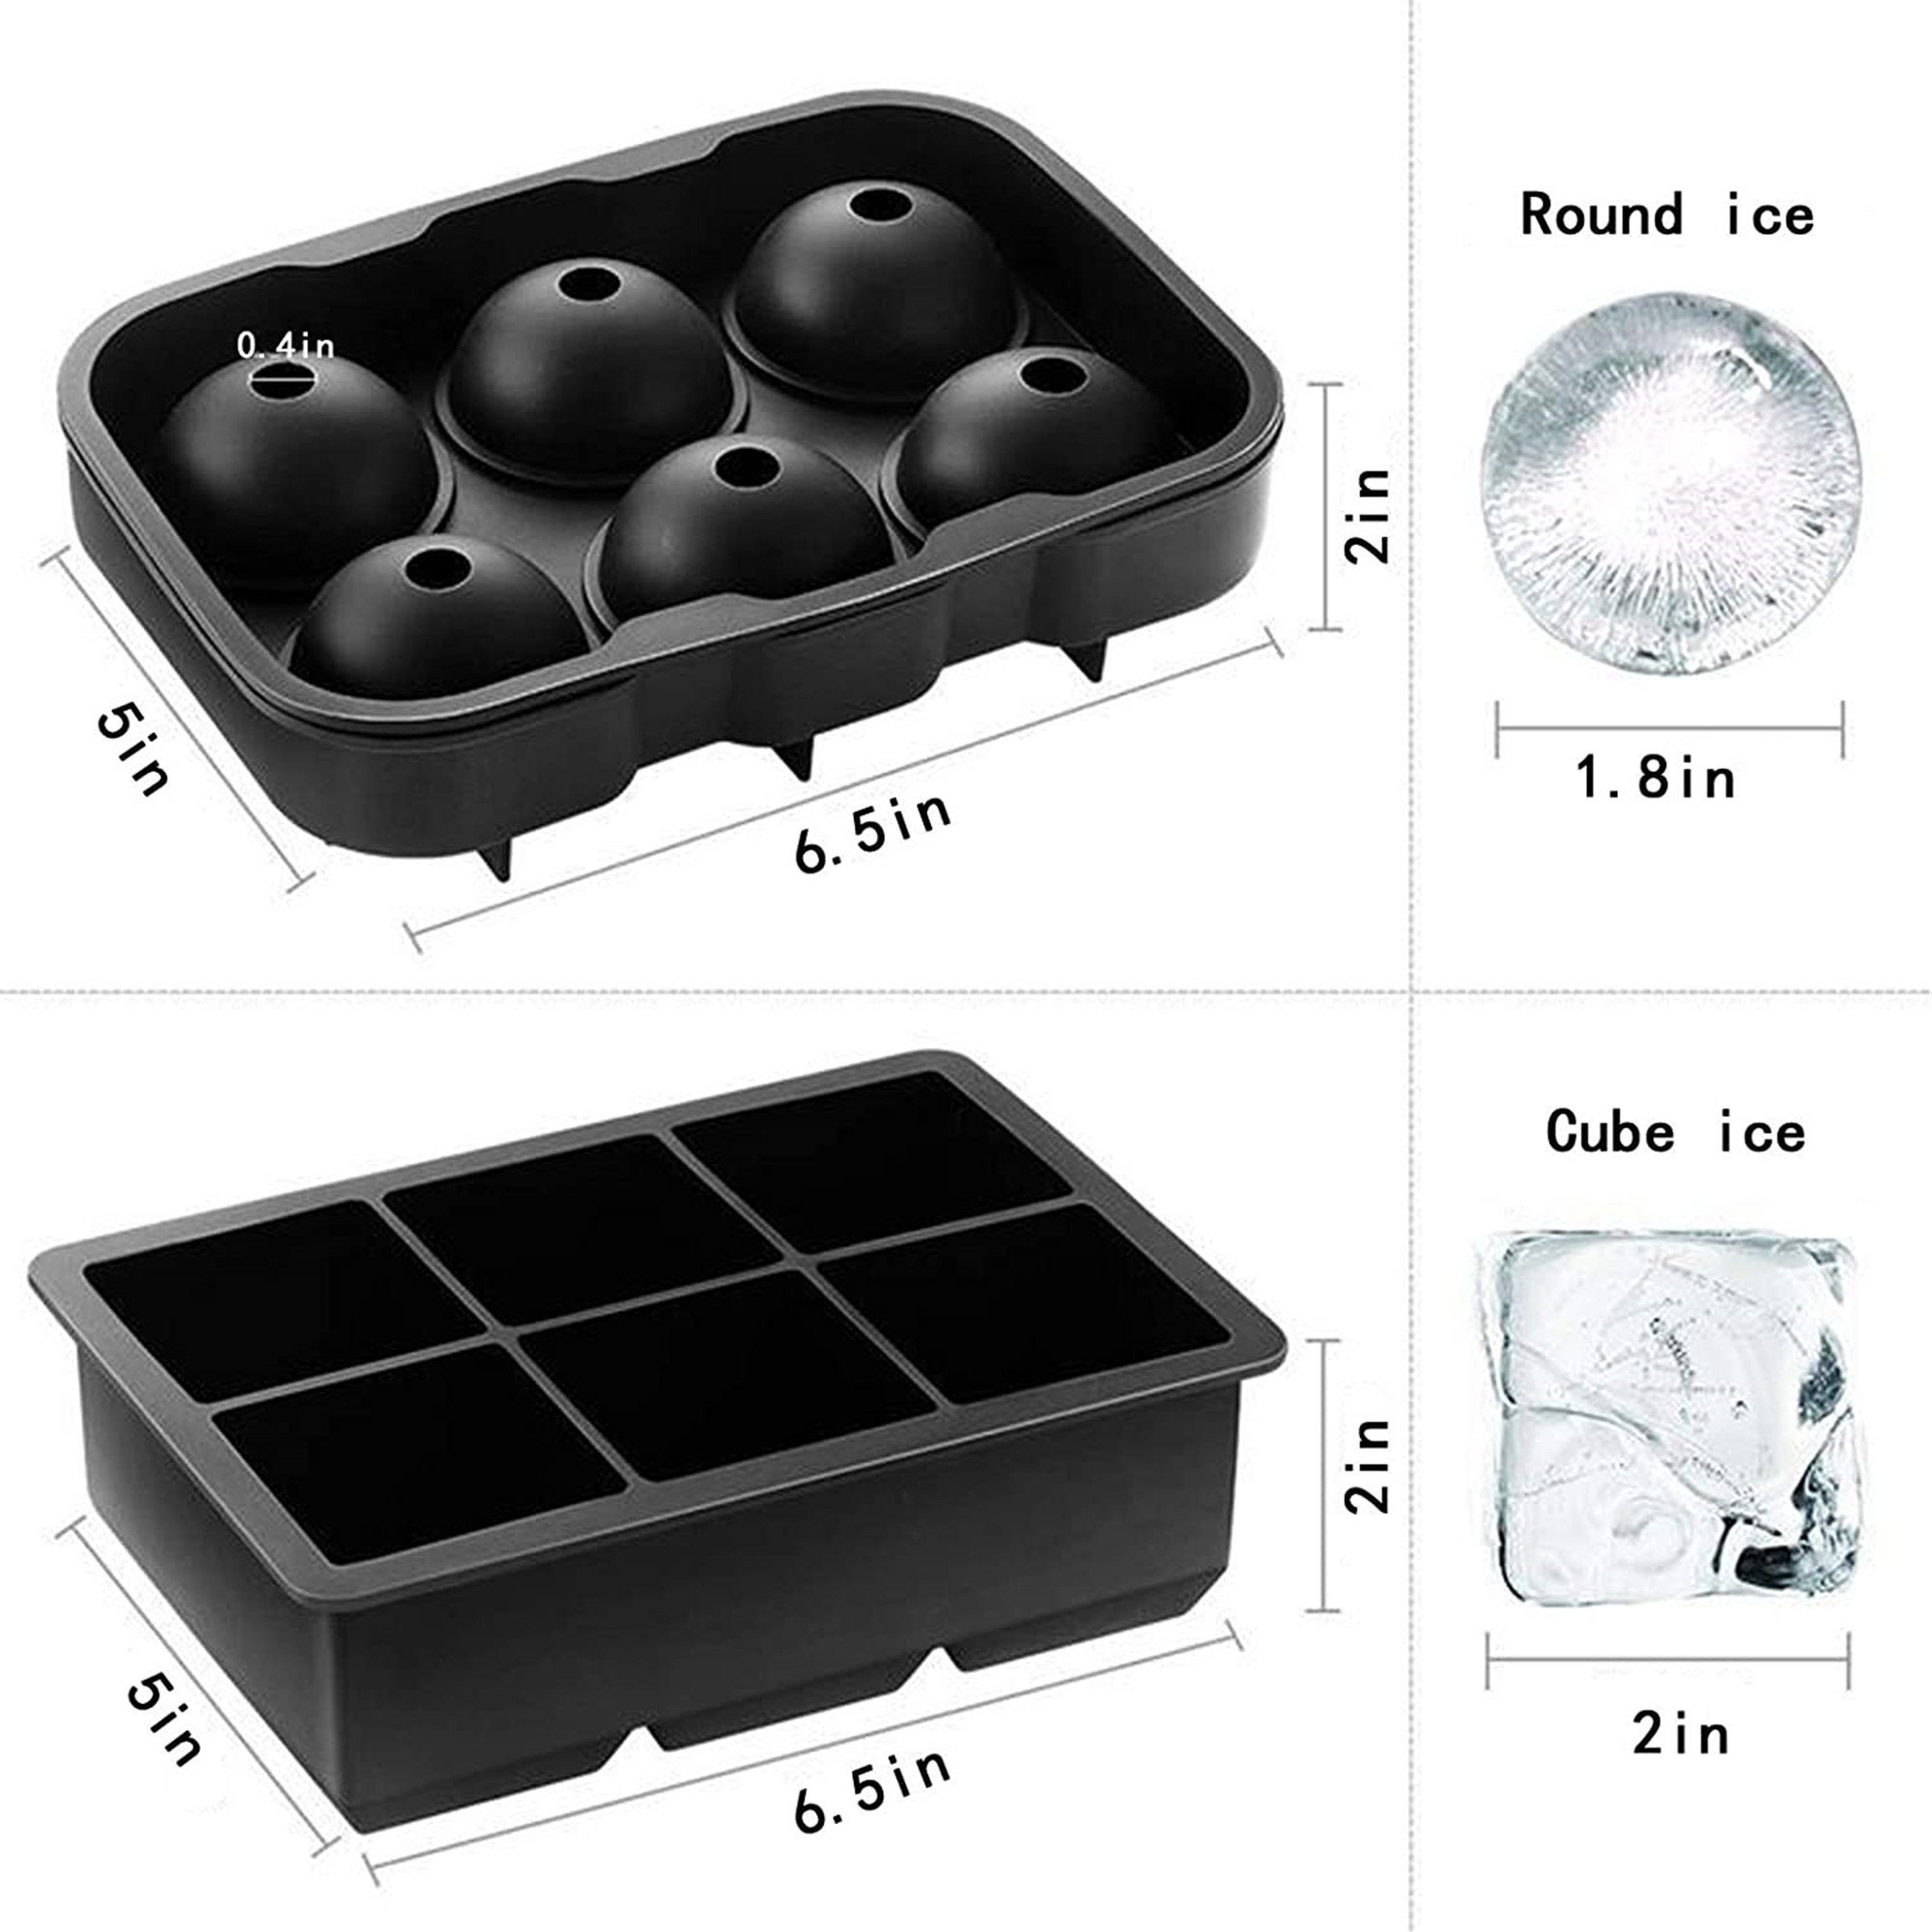 Oloey Ice Cube Trays Silicone - Large Ice Tray Molds for Making 33 Grid Round Ice Cubes for Whiskey, Size: One size, Blue